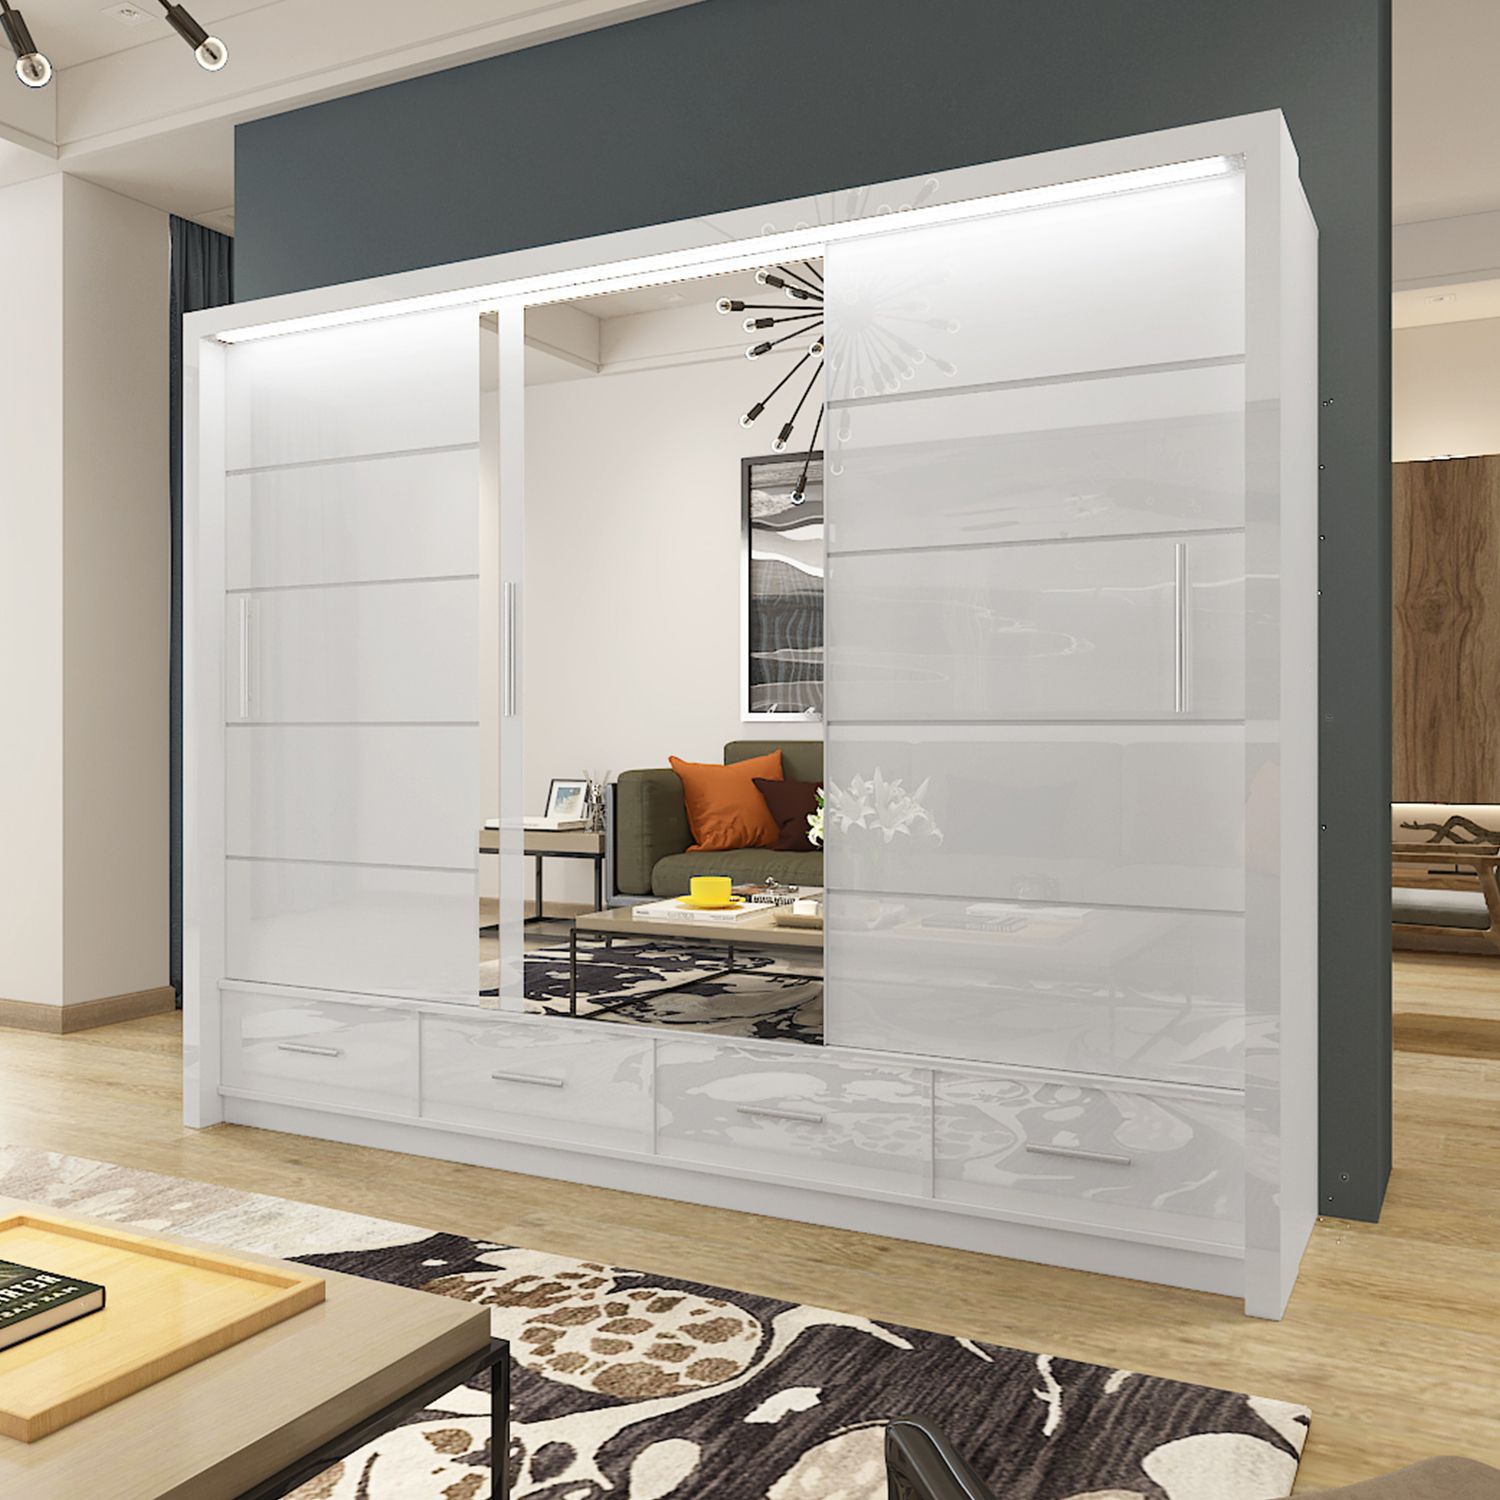 Sycylia Wardrobe 257cm White – Interwood Wardrobes Intended For White High Gloss Wardrobes (View 9 of 11)